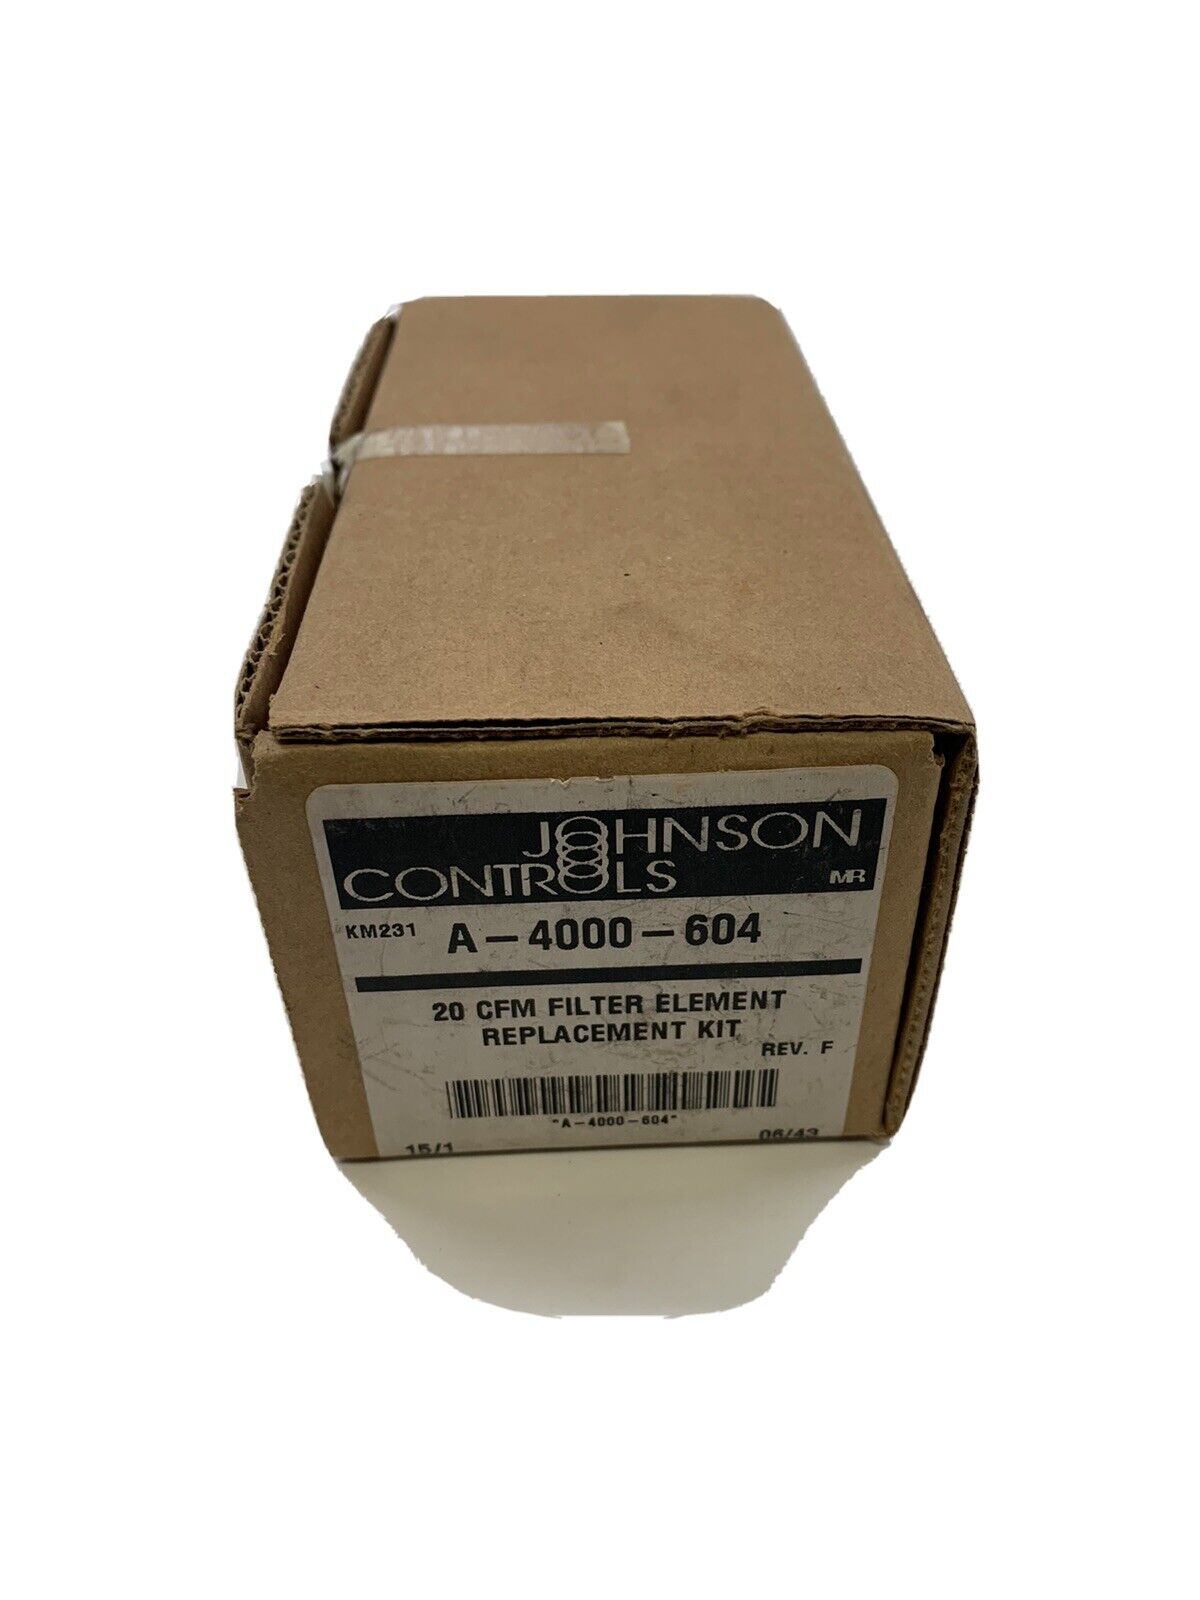 JOHNSON CONTROLS A-4000-604 NSFS 20 CFM Filter Replacement Kit